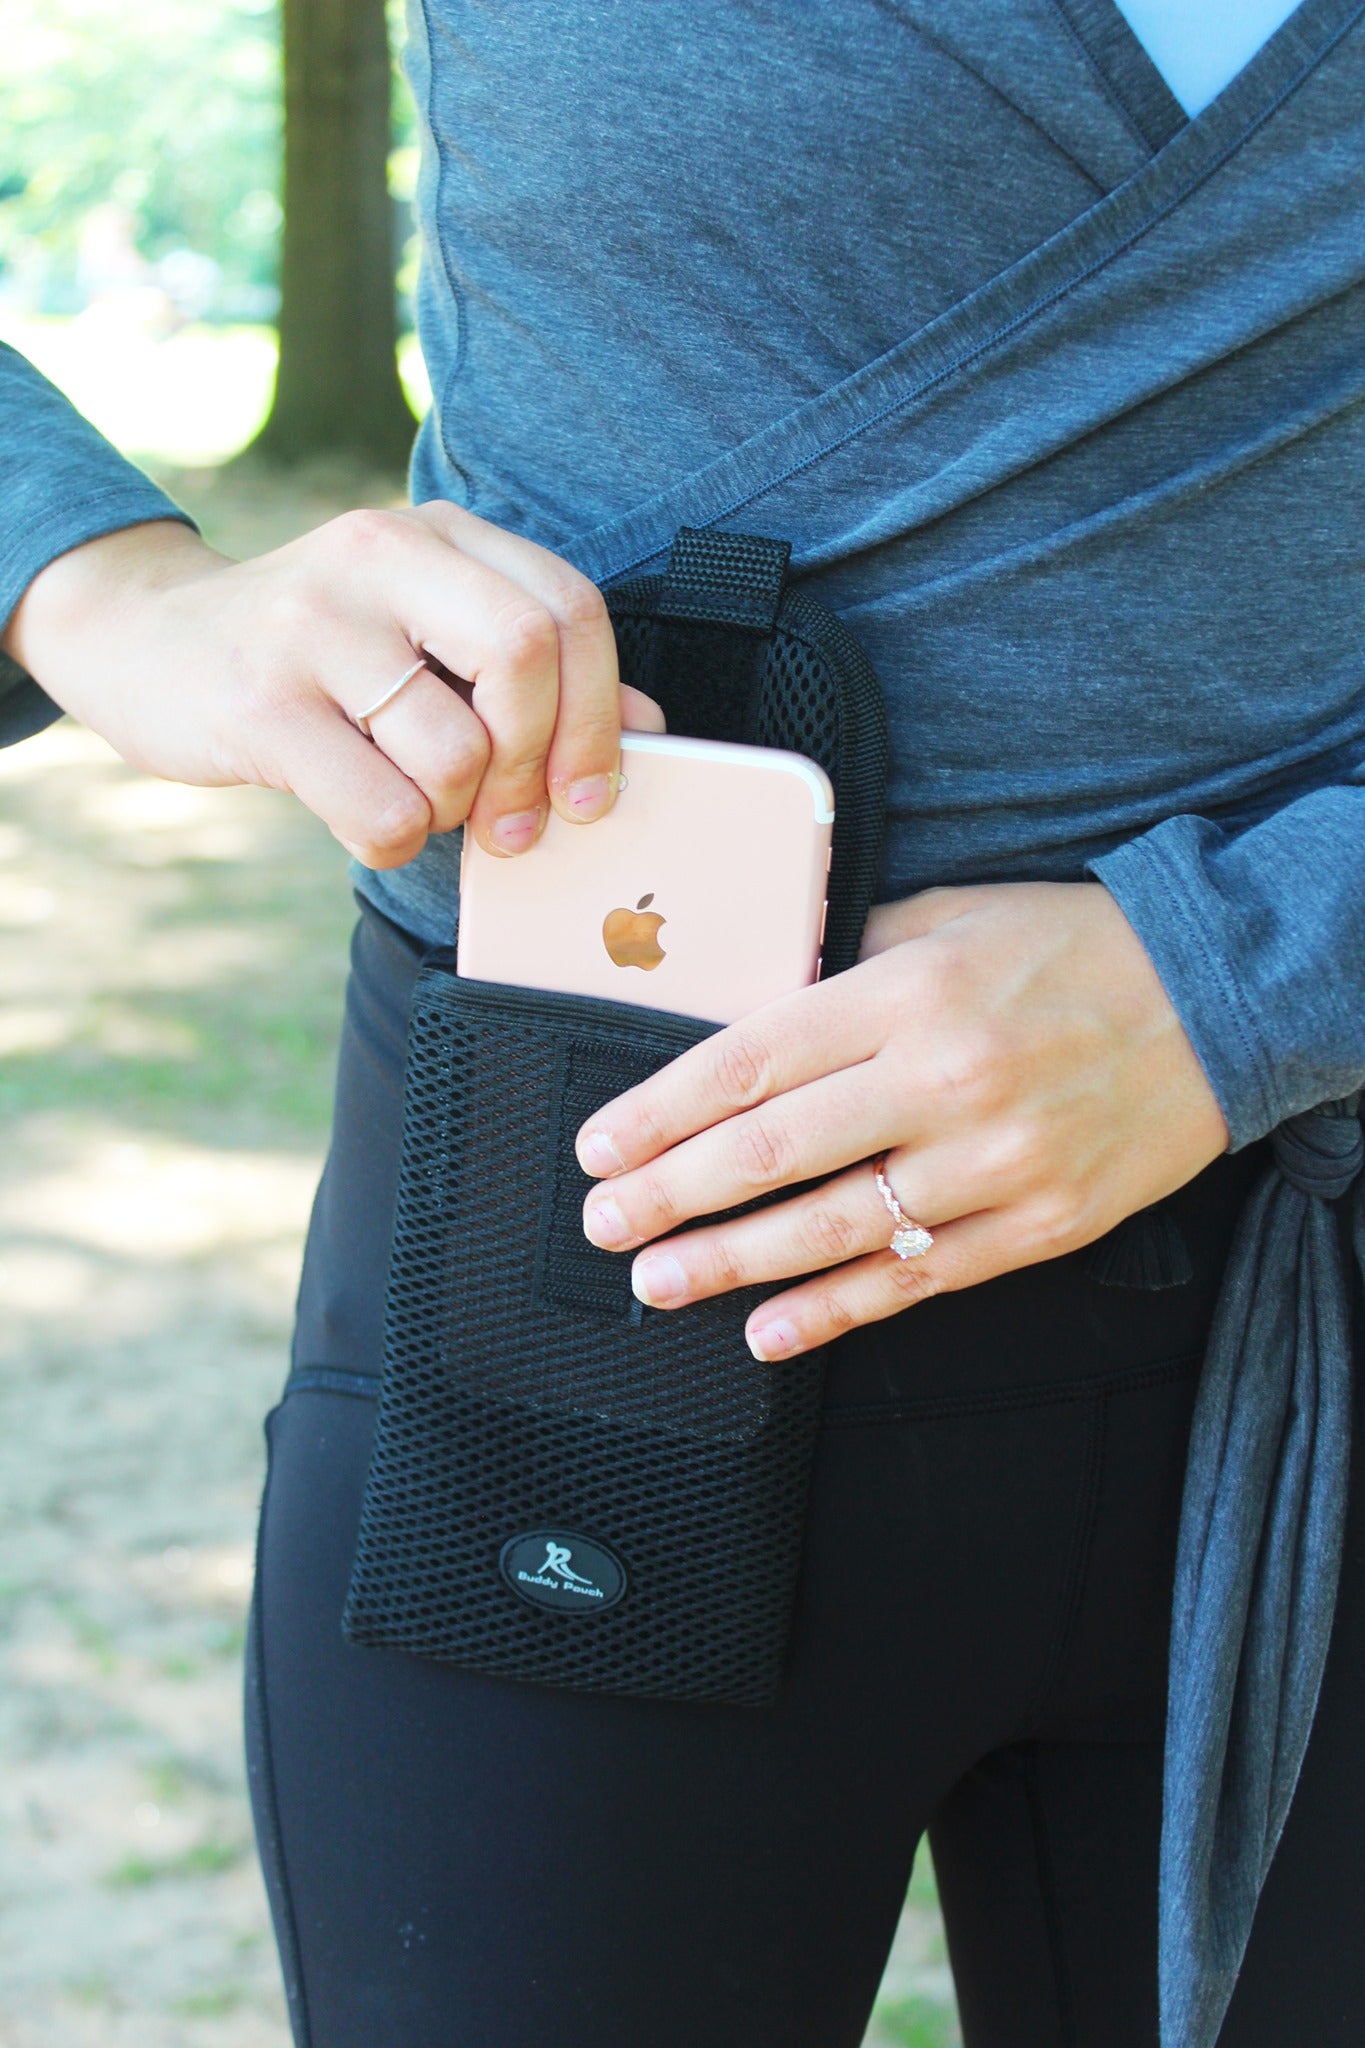 Running Buddy Magnetic XL Buddy Pouch: Magnet Pocket Pouches for Phones,  Keys